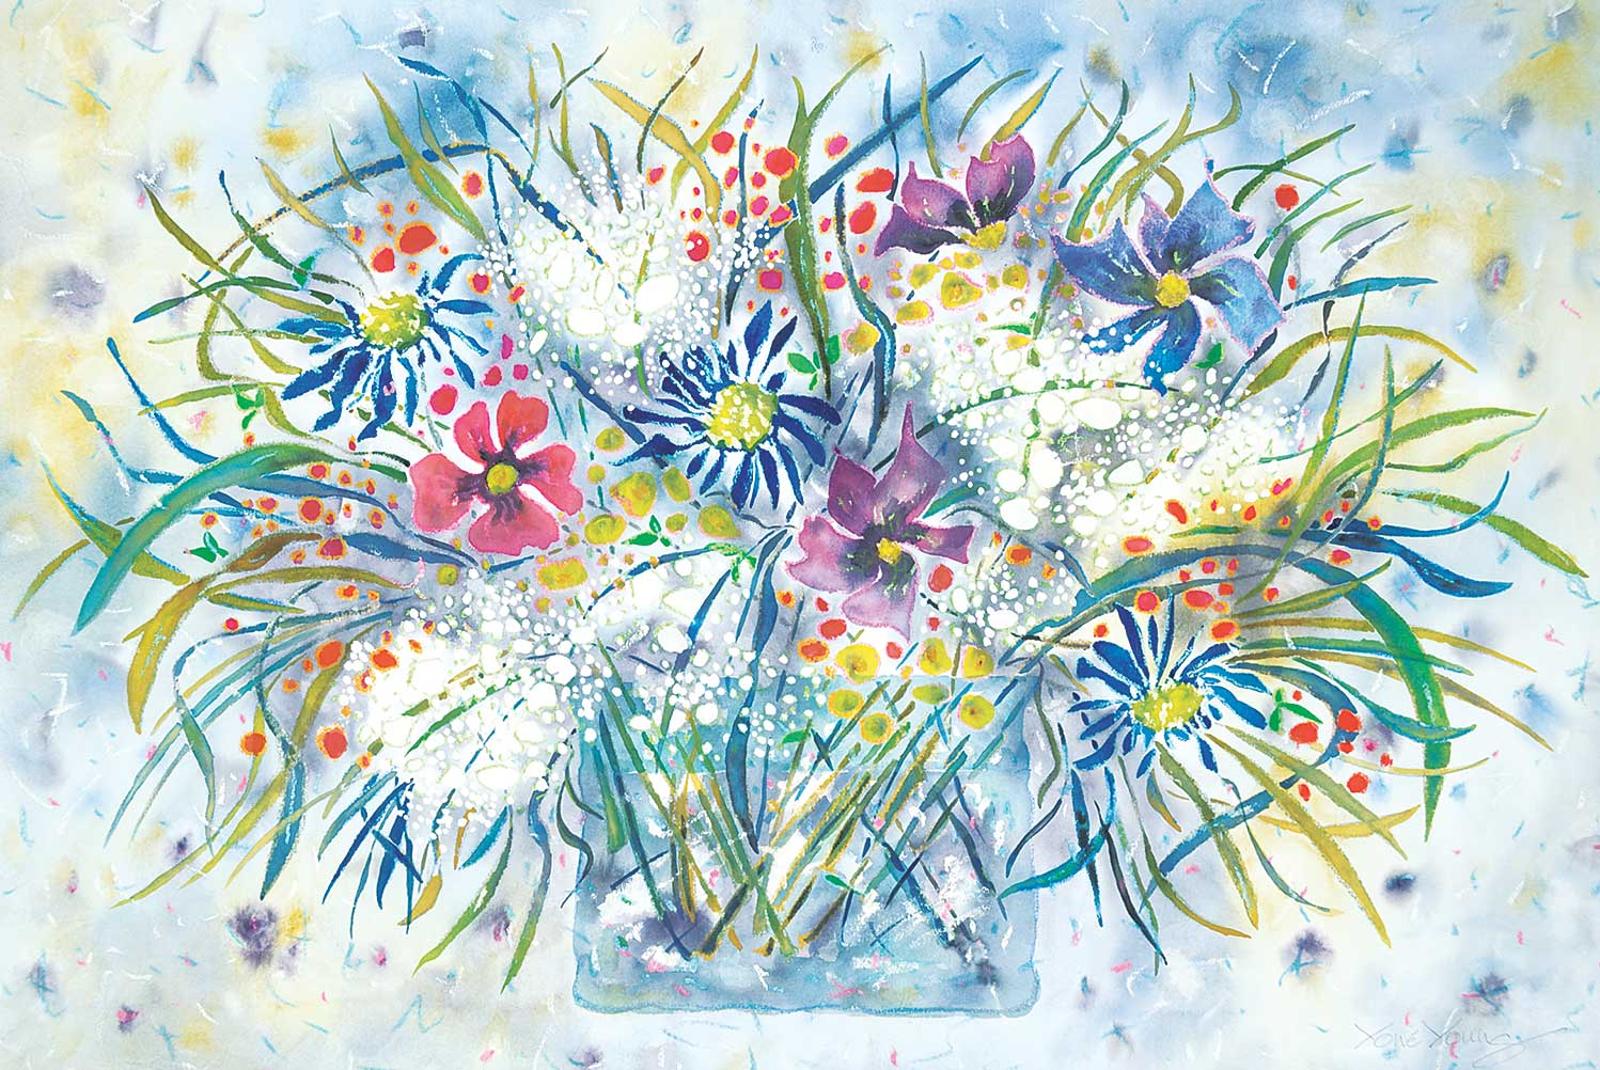 Yone Kvietys Young (1924-2011) - Untitled - Explosion of Spring Flowers